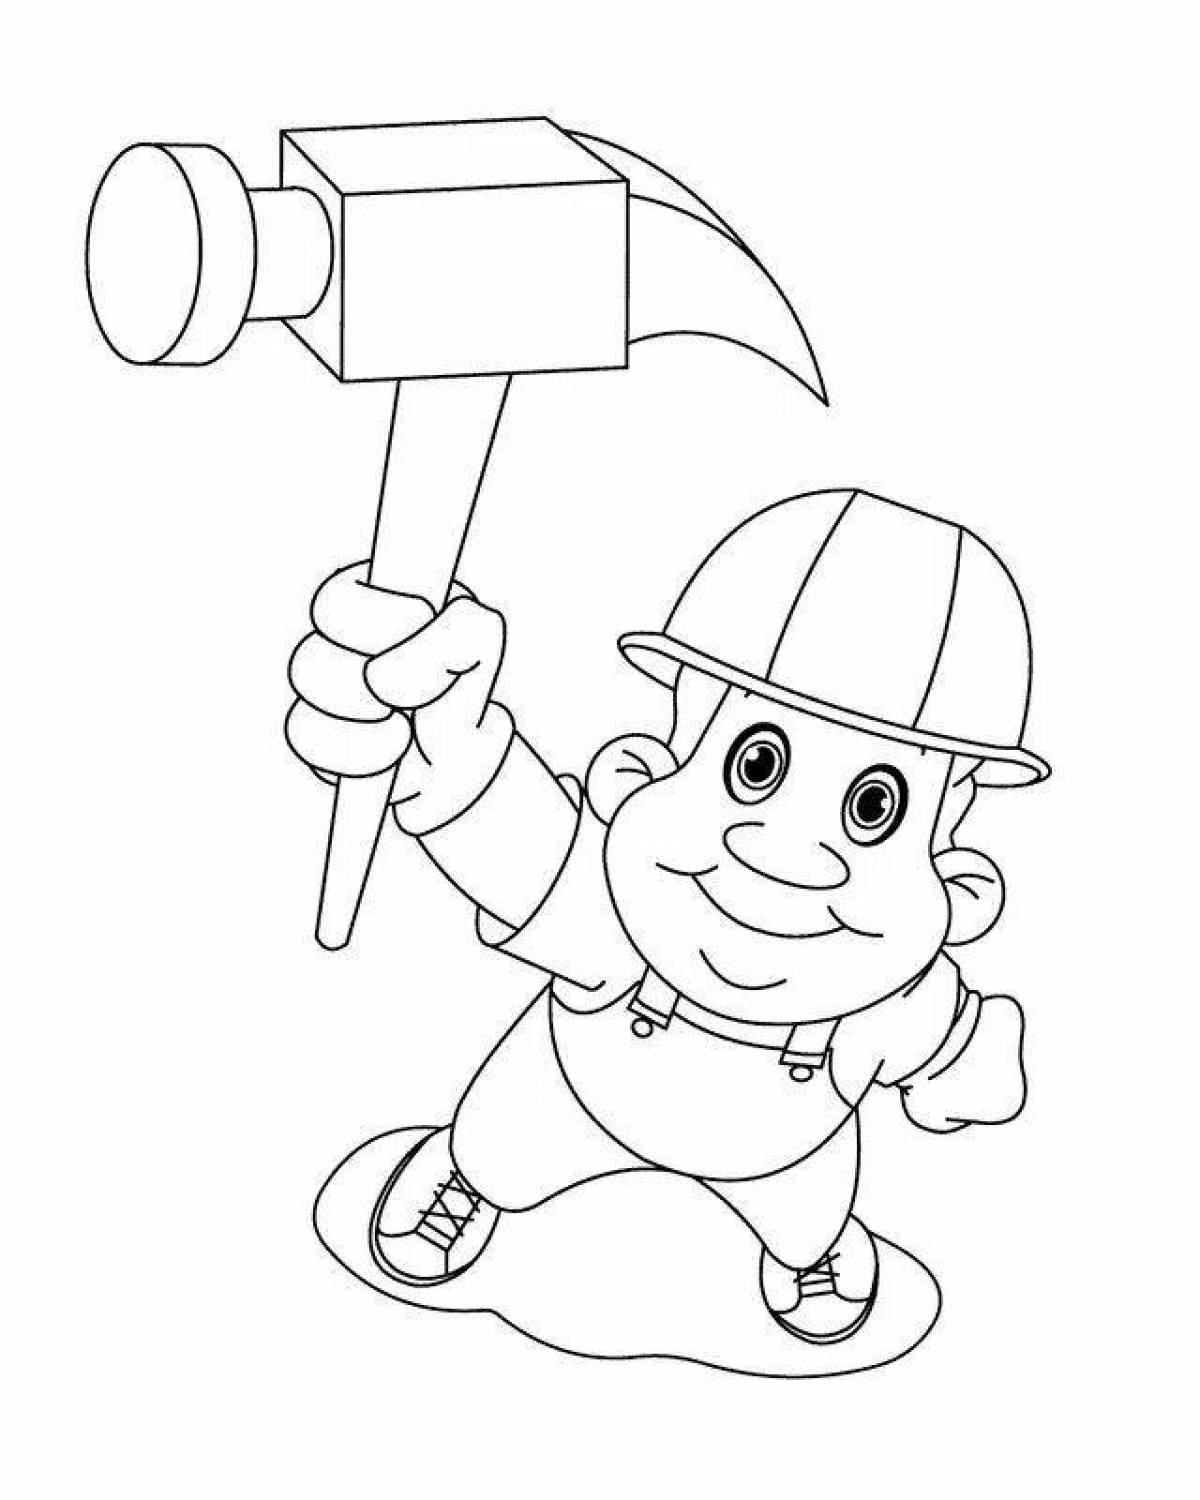 Happy Occupational Safety and Health Coloring Page